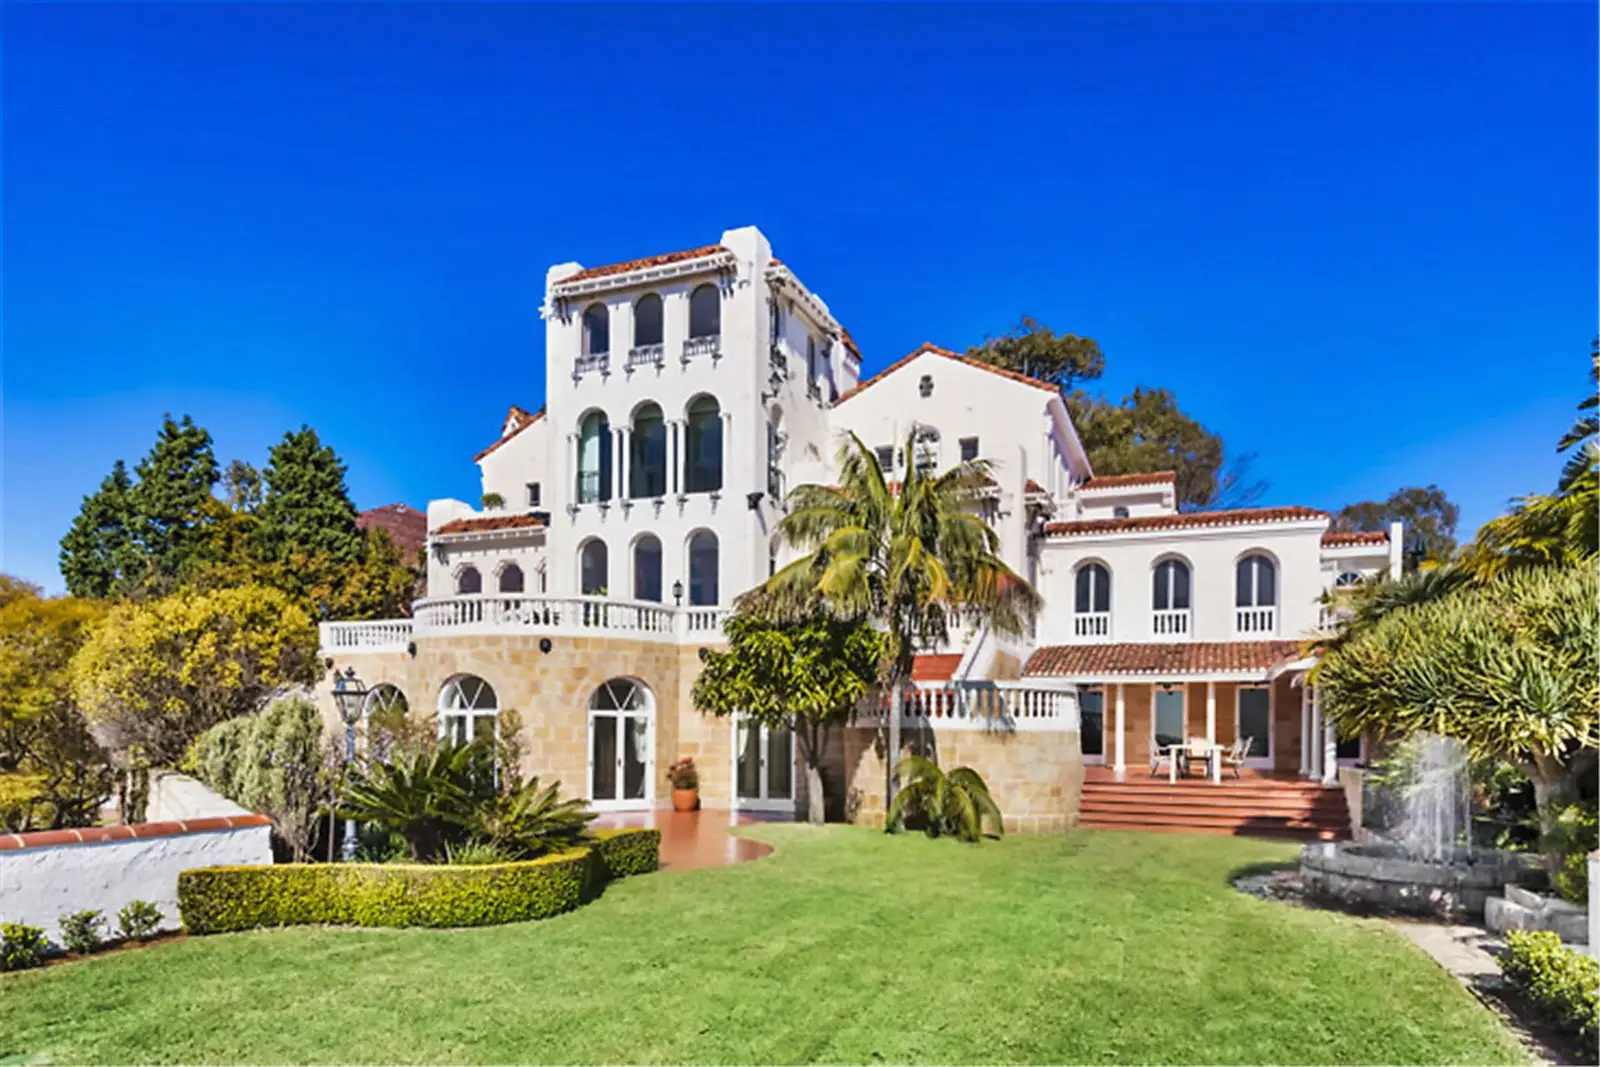 Photo #1: Bellevue Hill - Sold by Sydney Sotheby's International Realty